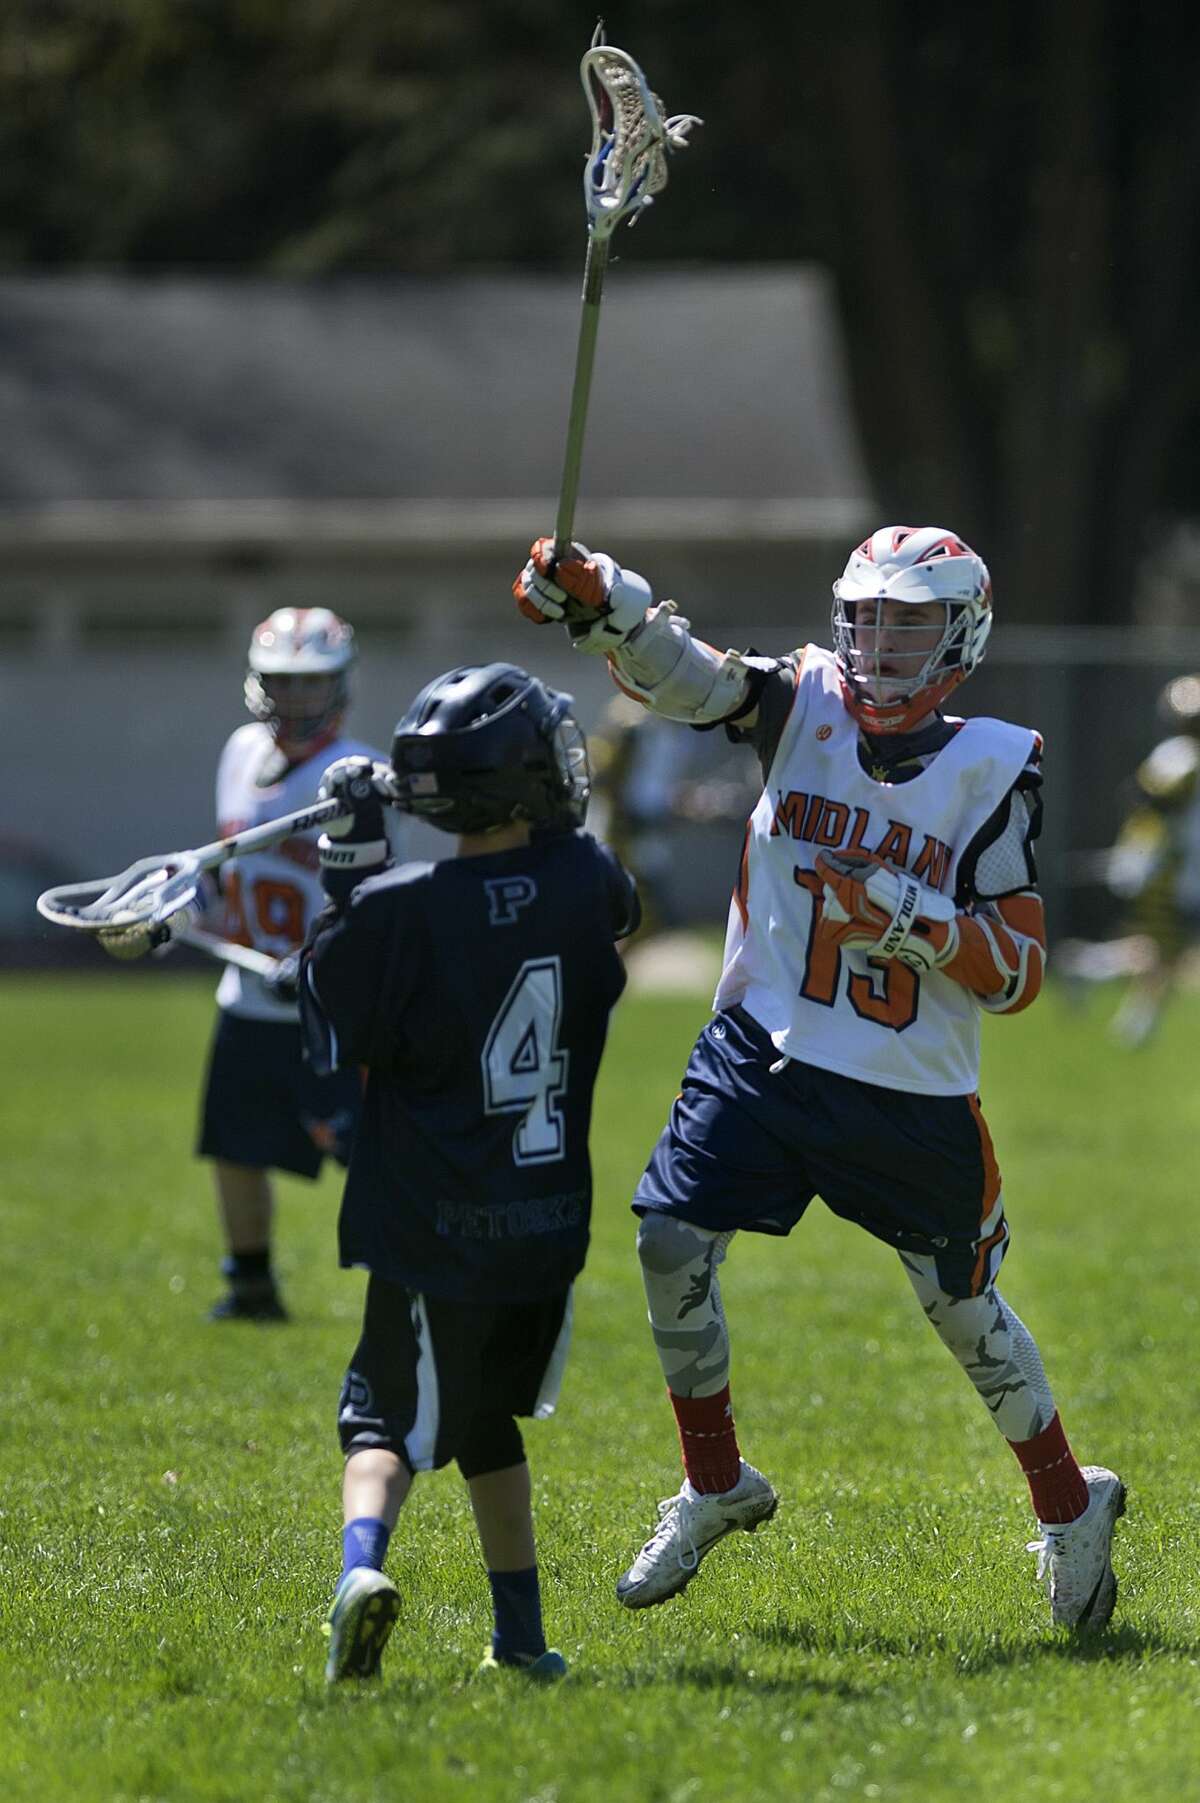 BRITTNEY LOHMILLER | blohmiller@mdn.net Midland Orange 14UA's Ryan Pomranky jumps to block Petoskey's Tate Wilder's pass during the Midland Lacrosse Club's Honor the Game tournament Saturday at Jefferson Middle School. Midland defeated Petoskey 11-3.